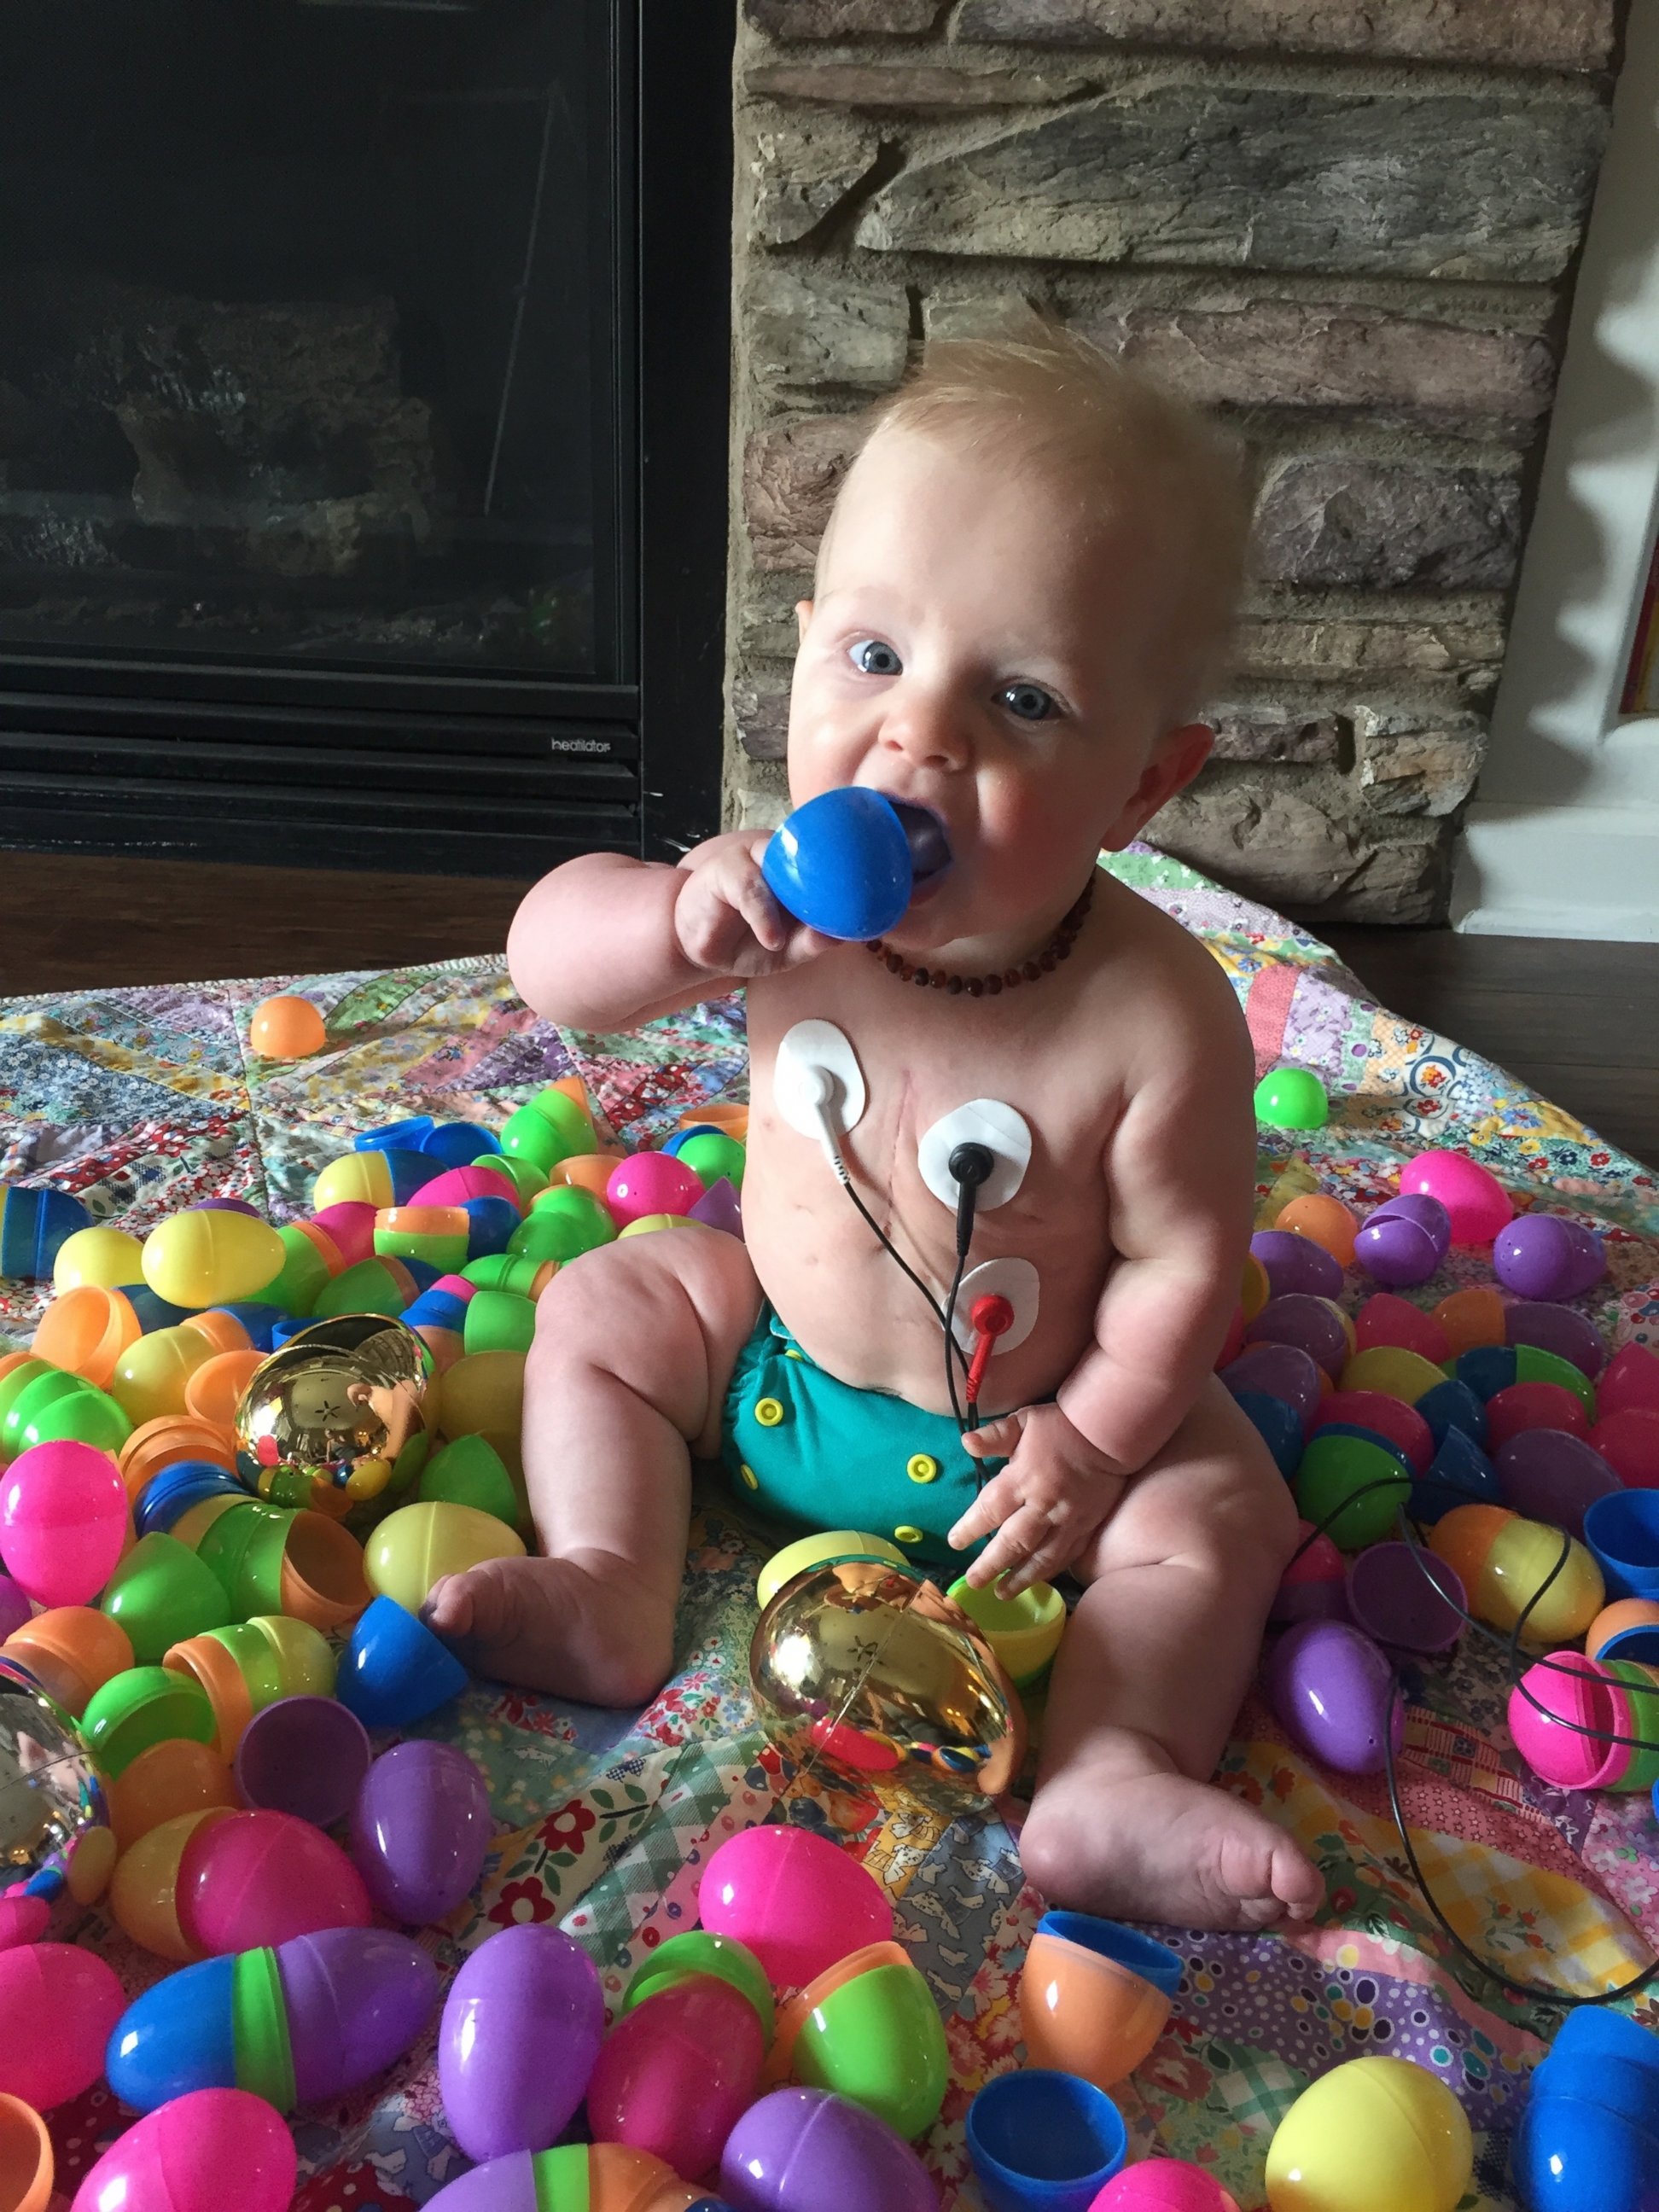 PHOTO: Janelle Cavanagh is holding an Easter-themed fundraiser to help pay for expenses for her son, Killian, who was born with a congenital heart defect.